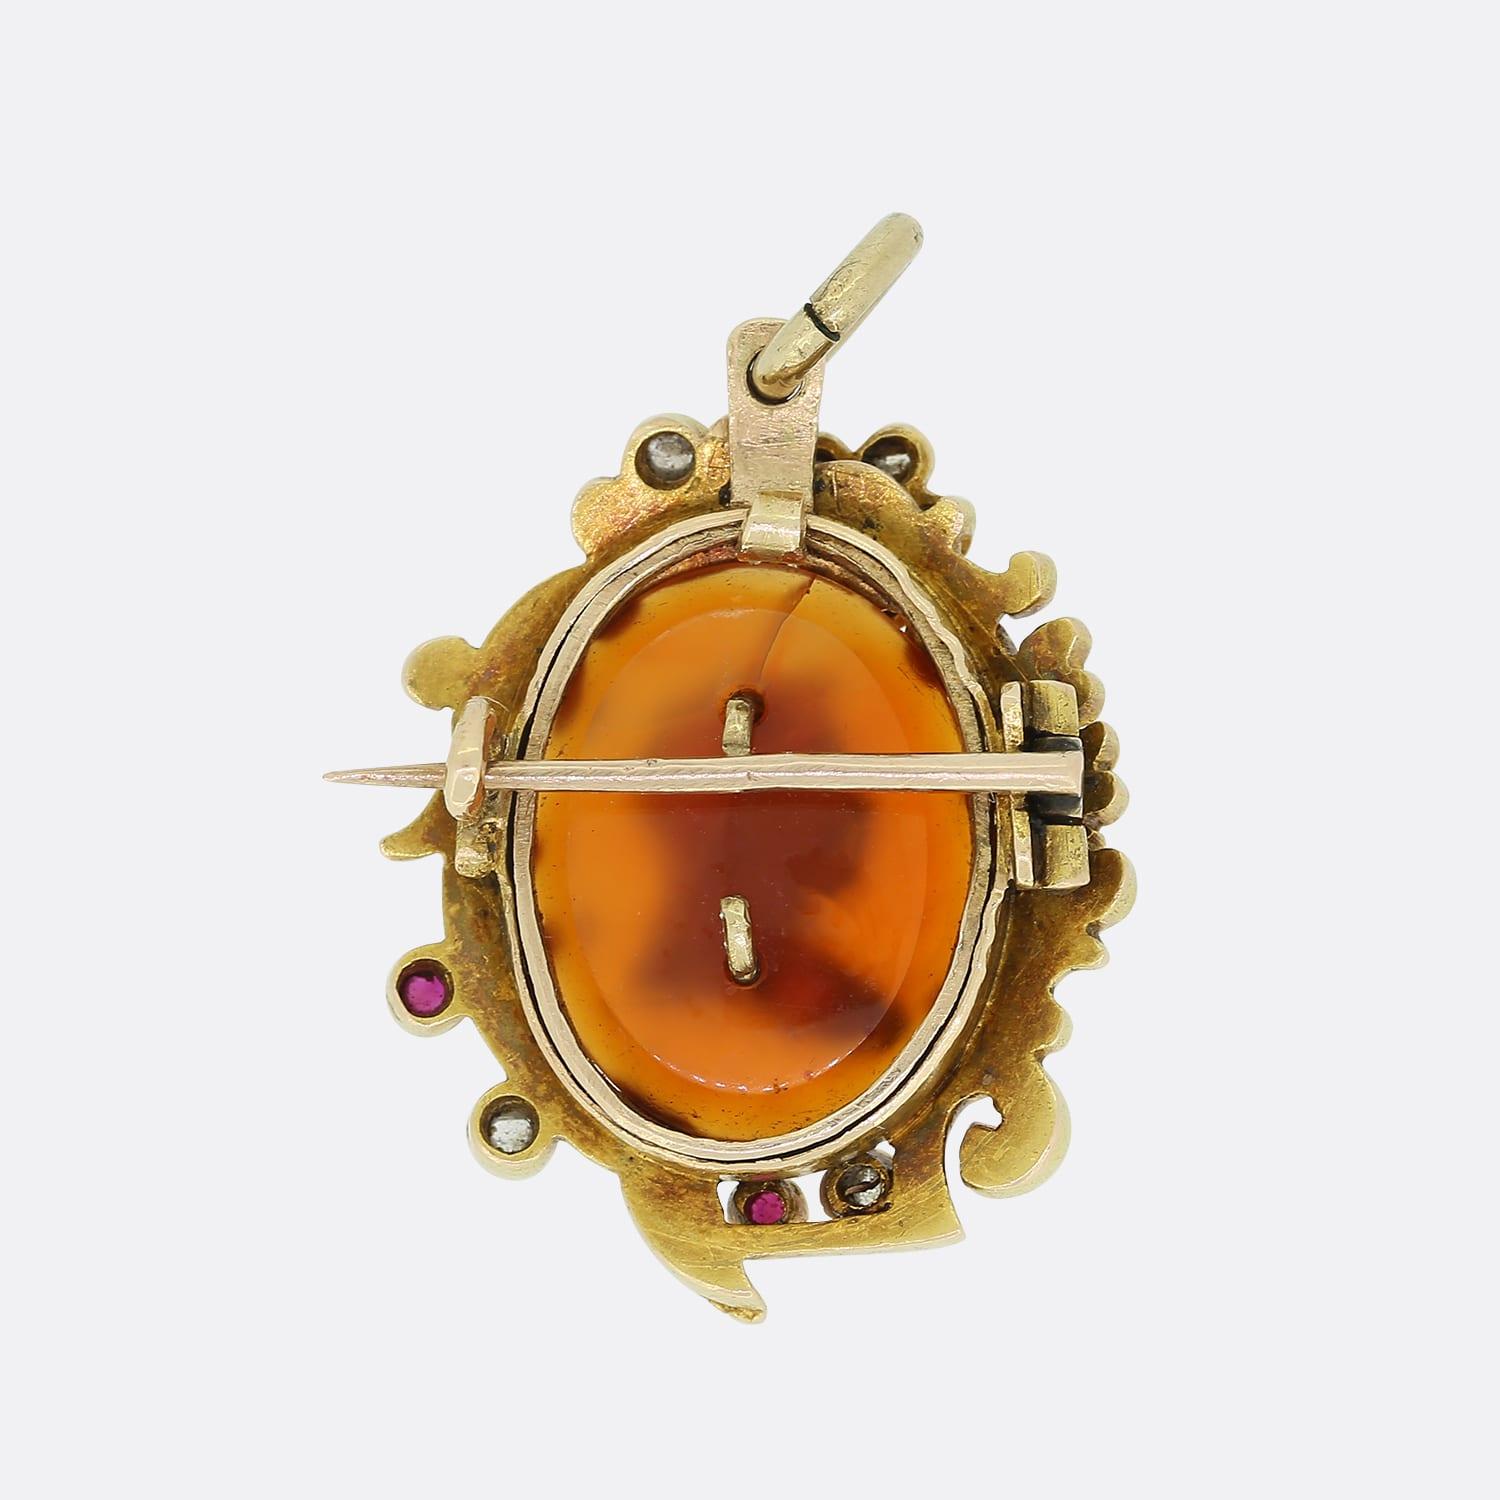 This is a truly wonderful, Victorian diamond and ruby pendant/brooch. The pendant features an oval shaped flat piece of red agate with a gold figure of Queen Victoria on. Surrounding the centre section is a gold frame which has been set with bright